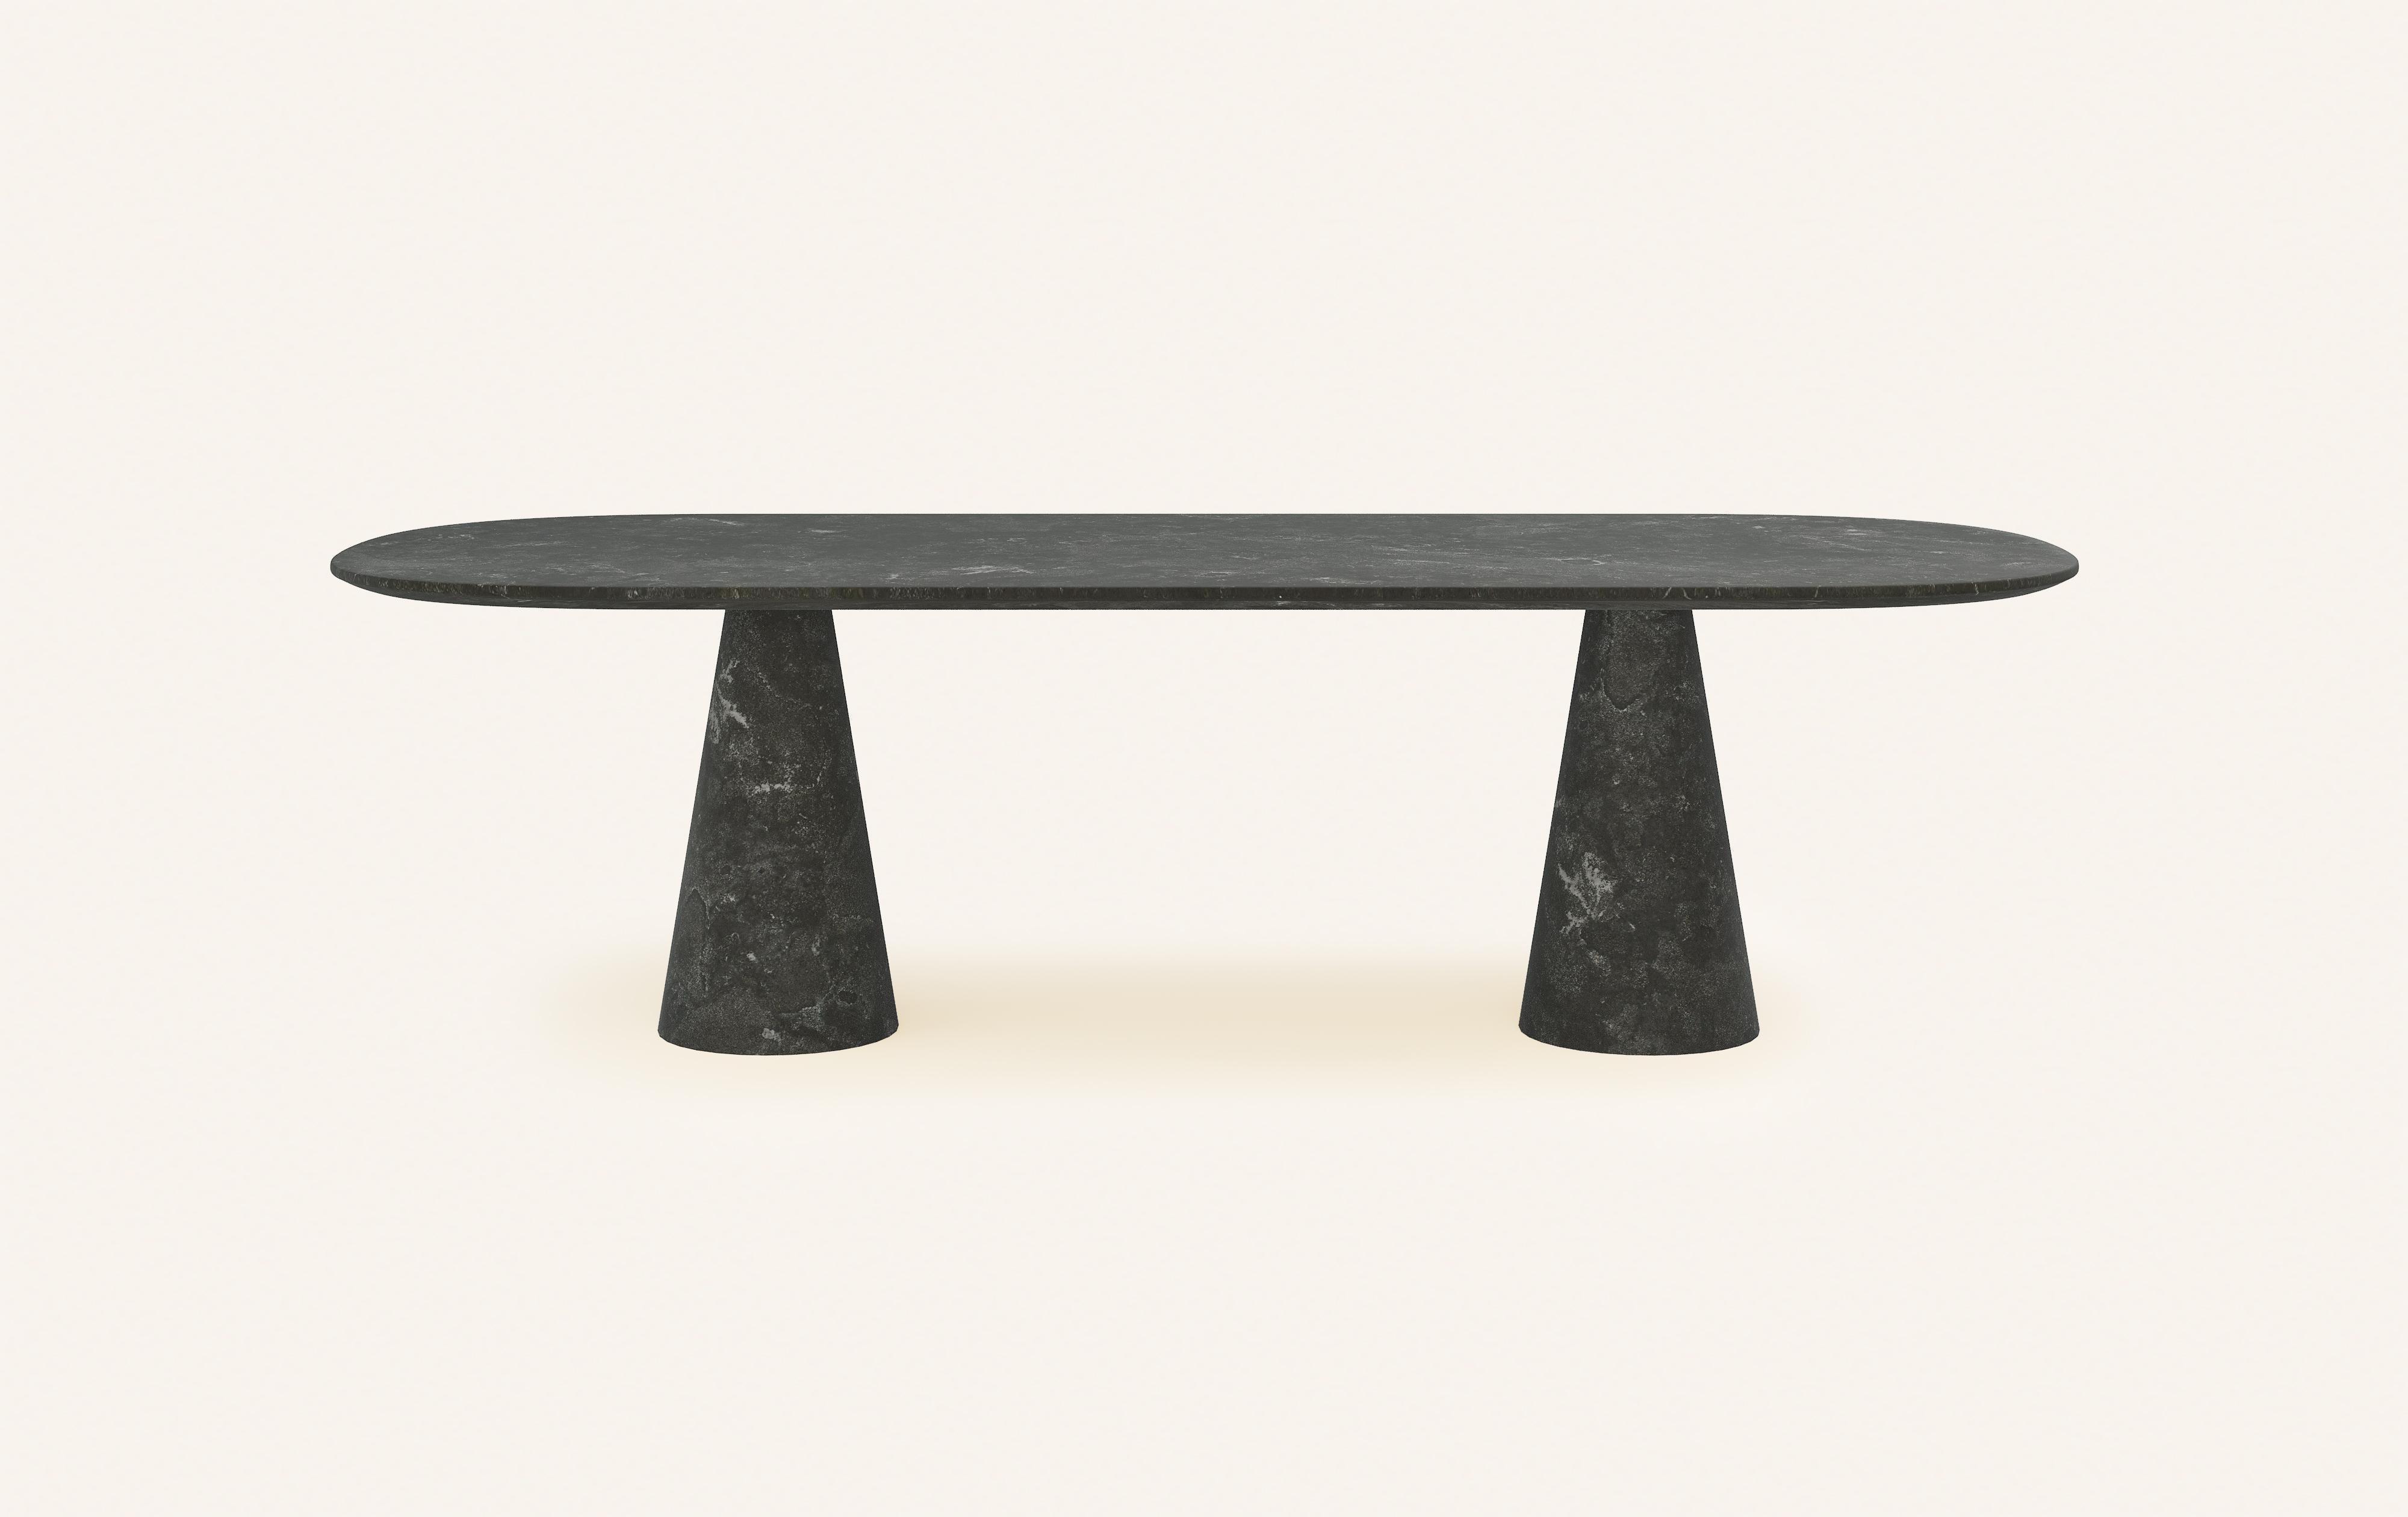 SIMPLISTIC YET MUSCULAR FORMS INFLUENCED BY POST MODERN ITALIAN DESIGN.

DIMENSIONS: 
96”L x 42”W x 30”H: 
- 1.5